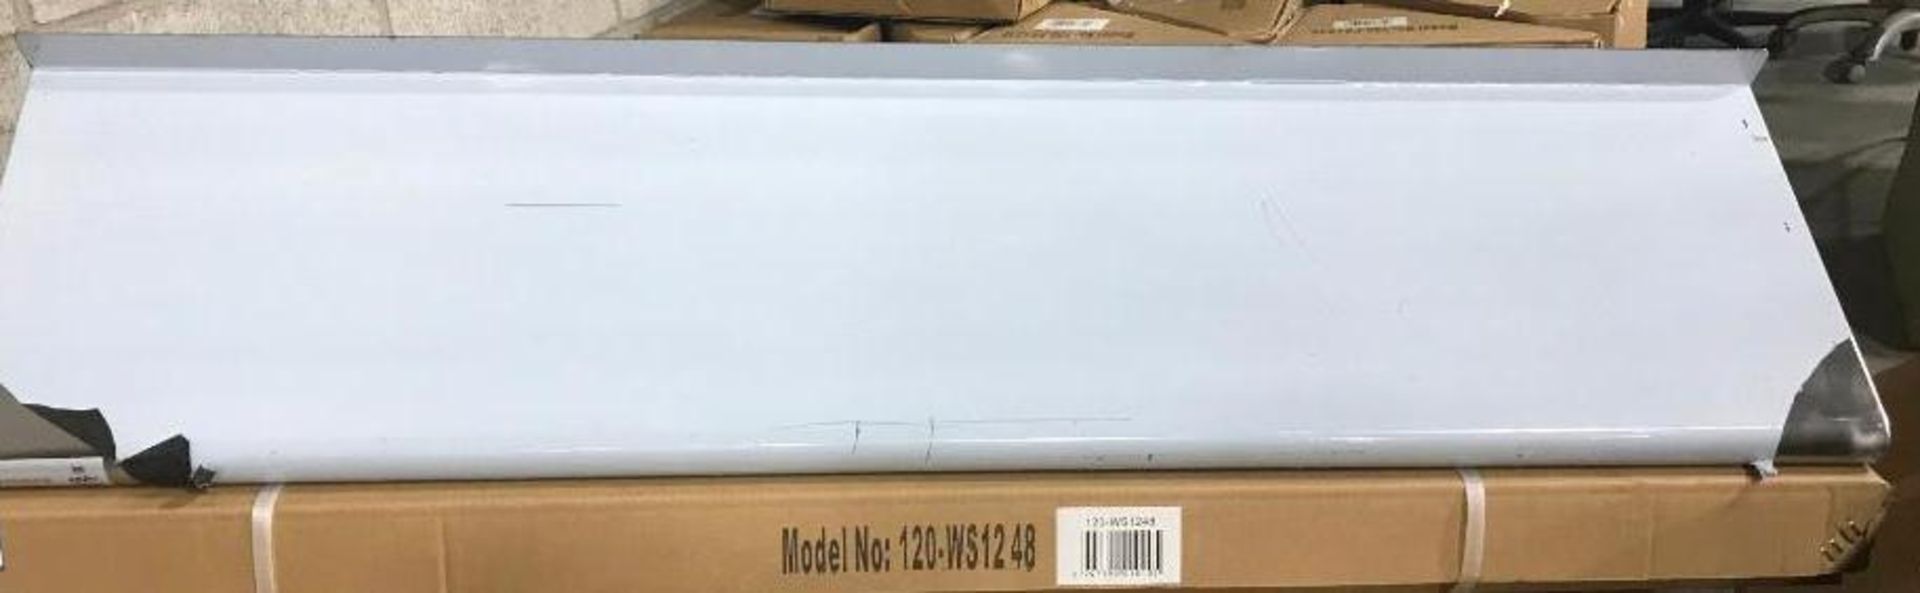 WALL MOUNT S/S SHELF 12"X48", 120-WS1248 - NEW IN BOX - Image 3 of 3